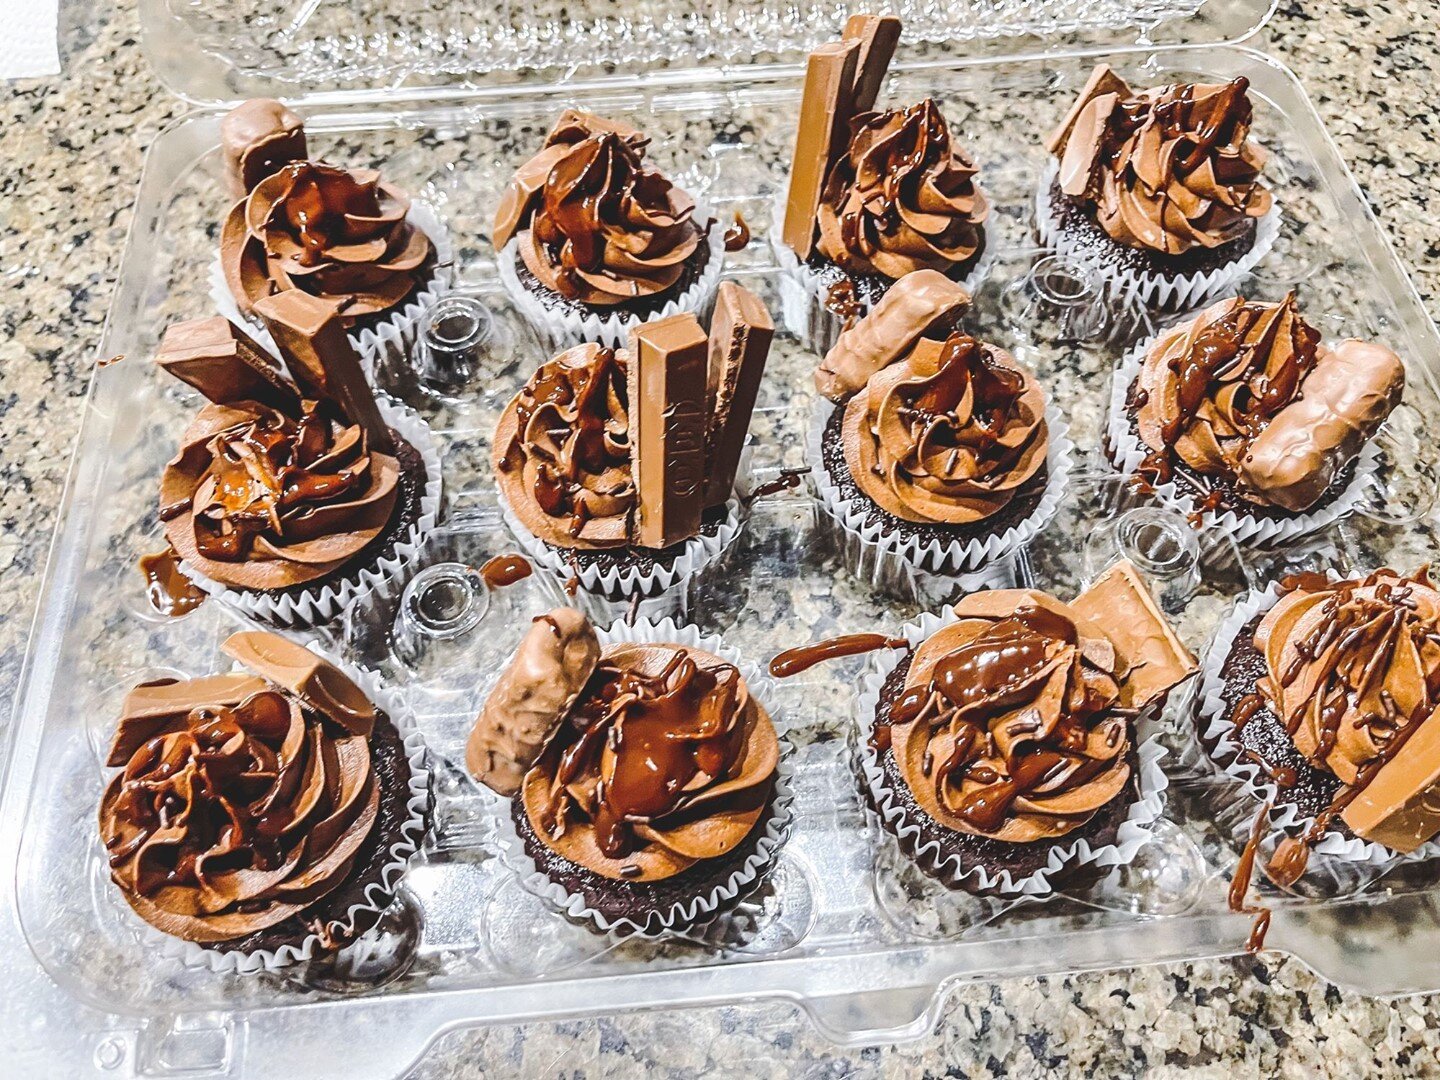 We&rsquo;ve said it before and we&rsquo;ll say it again. You can NEVER have too much chocolate. ⠀
Chocolate cupcakes, chocolate icing, chocolate bars, chocolate ganache. ⠀
⠀
⠀
#confettibakeco #kwawesome #chocolate #chocolatecake #chocolatecupcakes #w